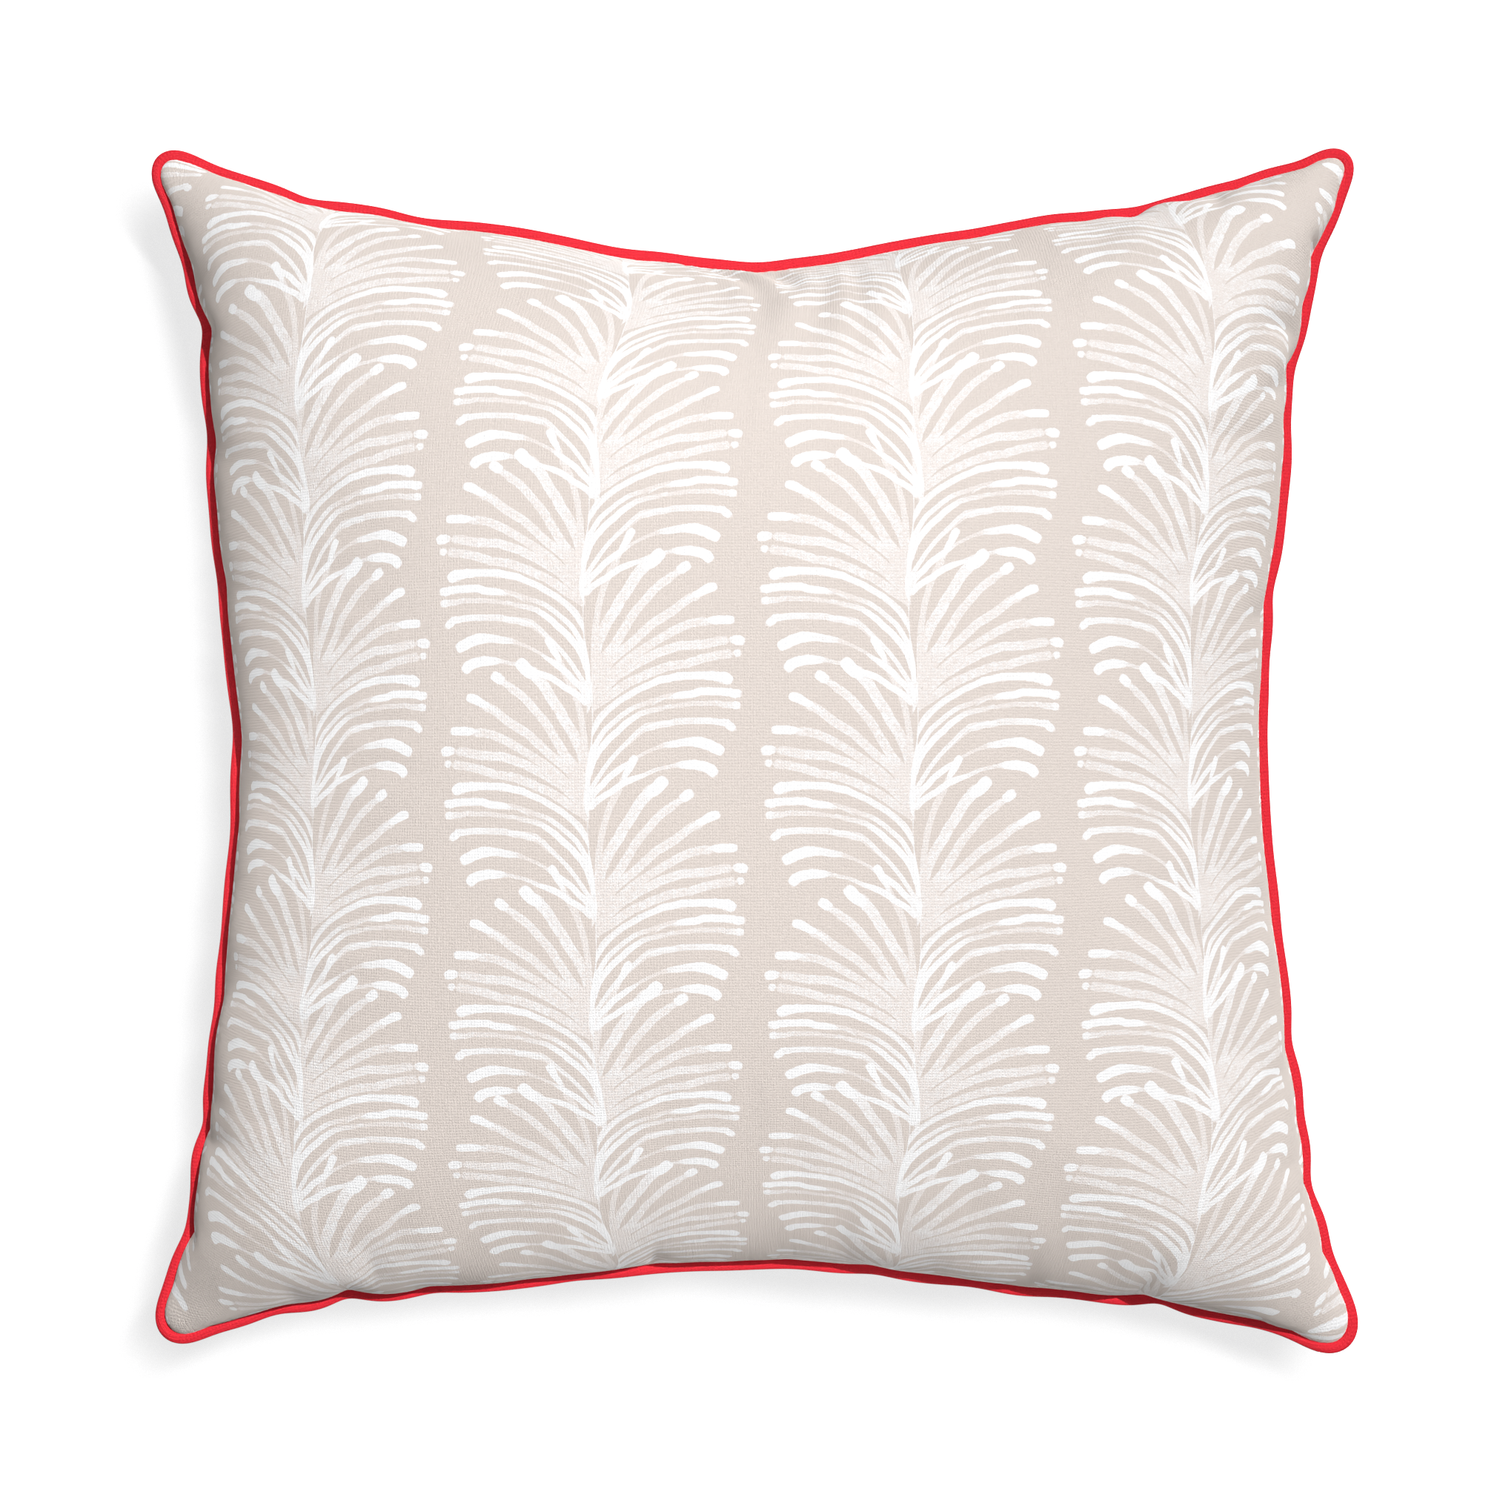 Euro-sham emma sand custom pillow with cherry piping on white background